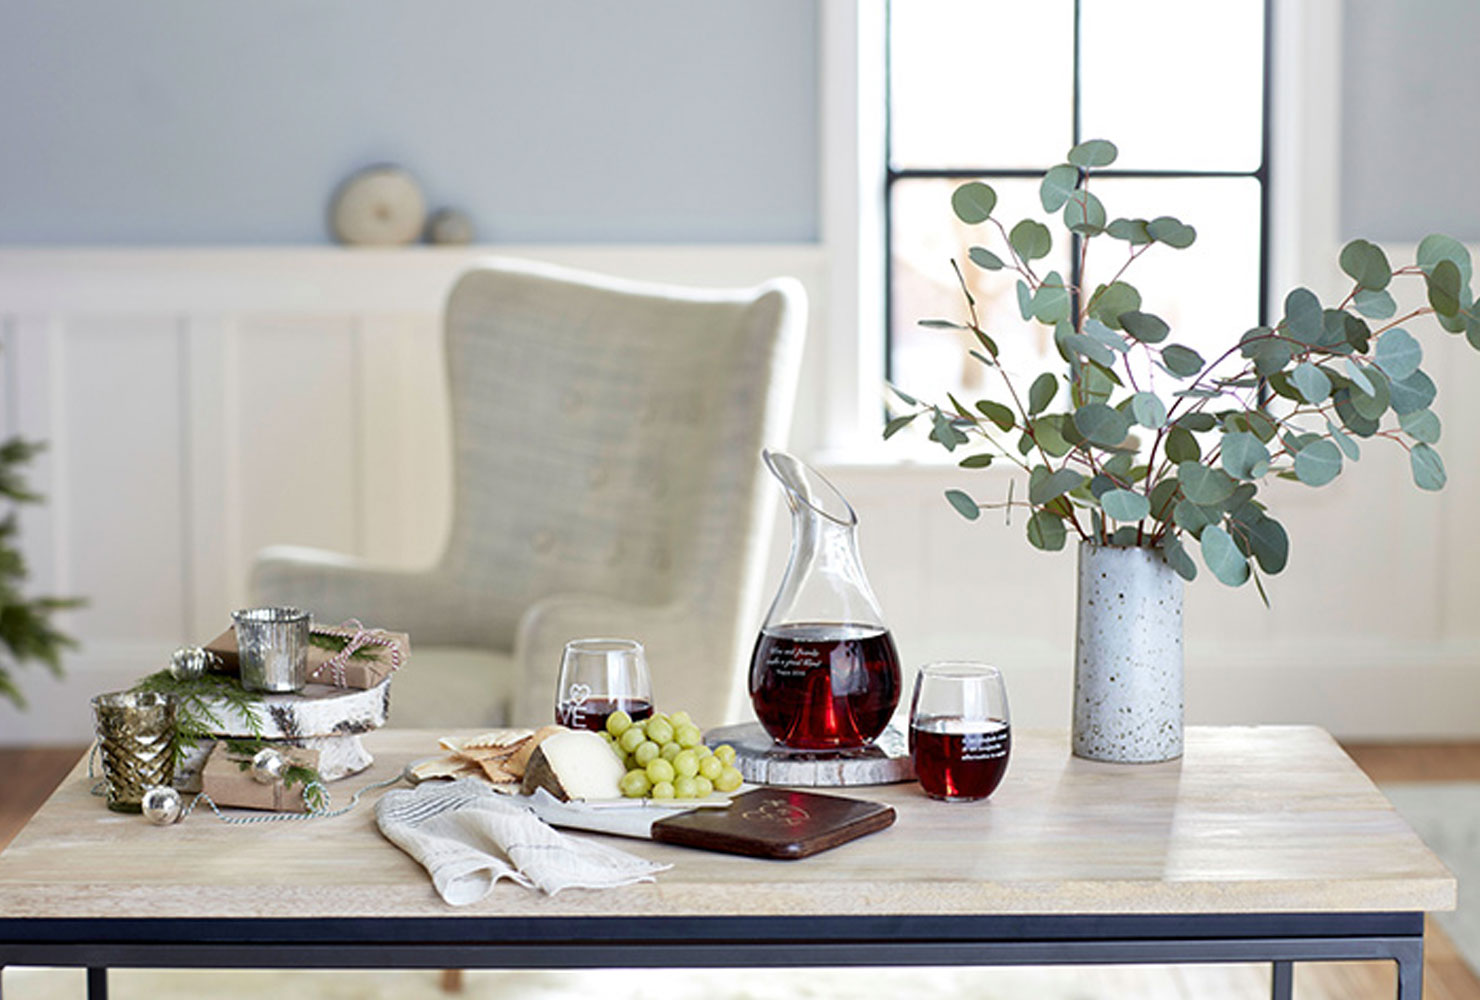 Home decor with decanter and wine glasses.